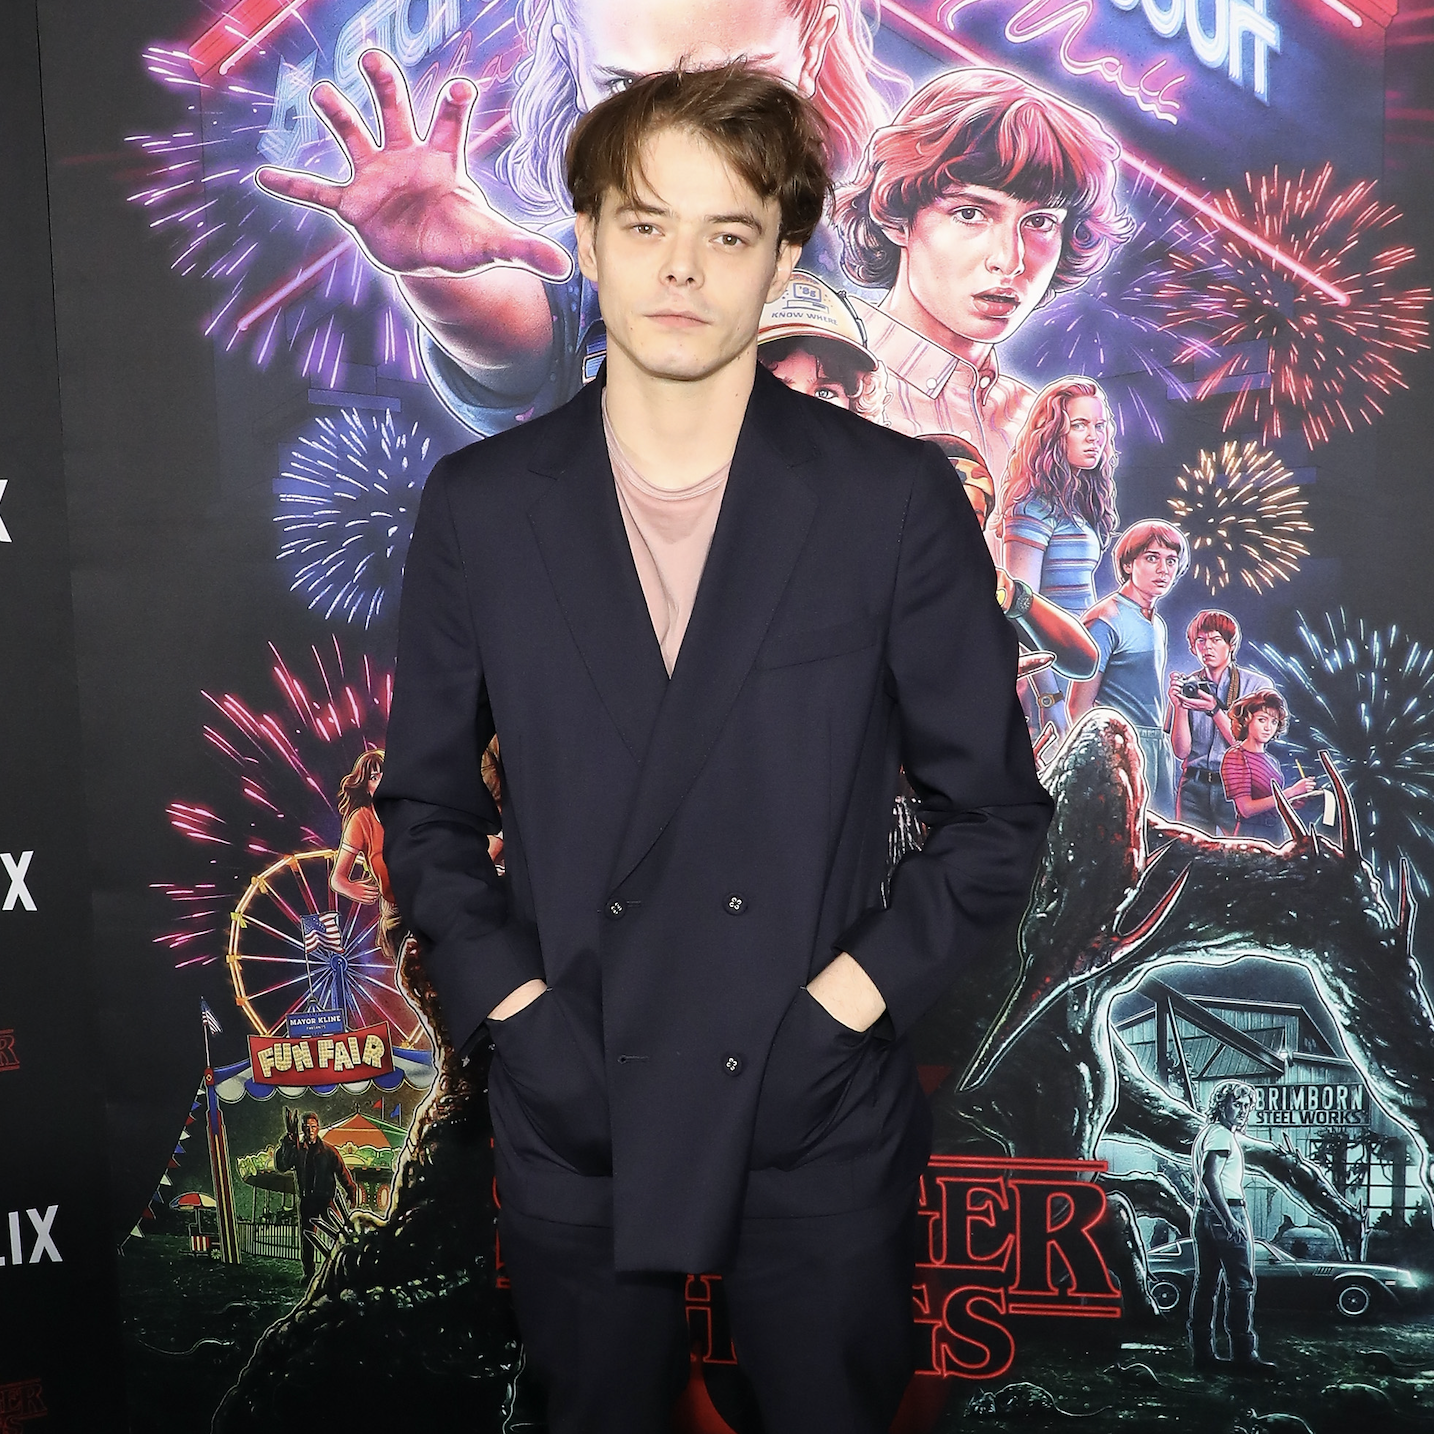 The New Mutants', a special look at Charlie Heaton and Maisie Williams